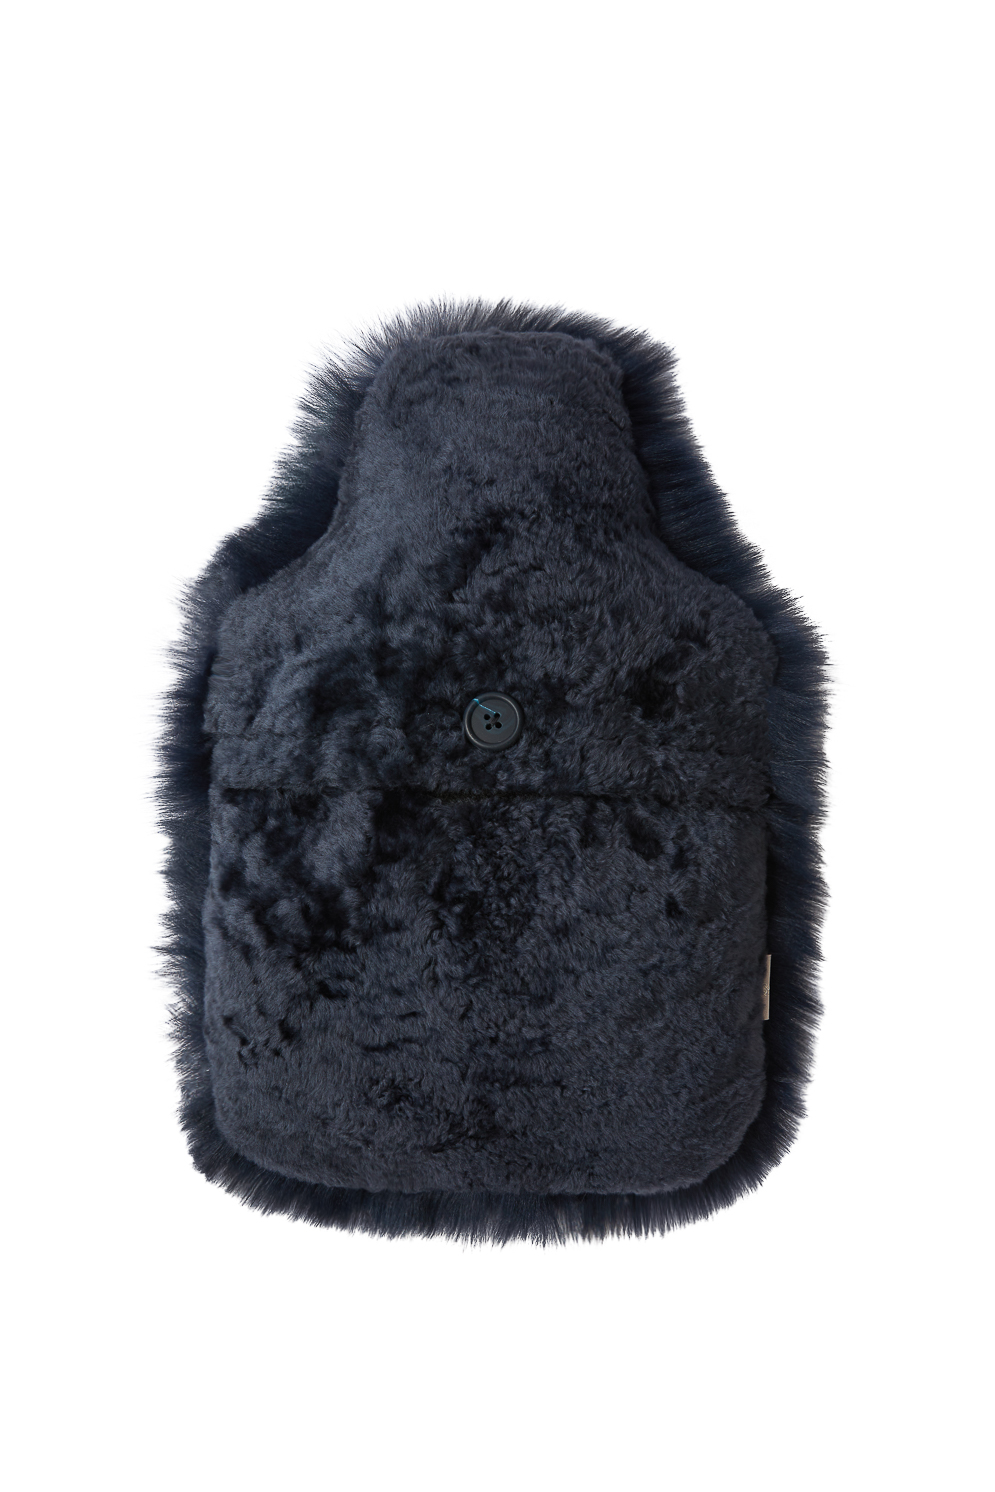 Blue Shearling Hot Water Bottle Cover gushlow and cole homeware back cut out